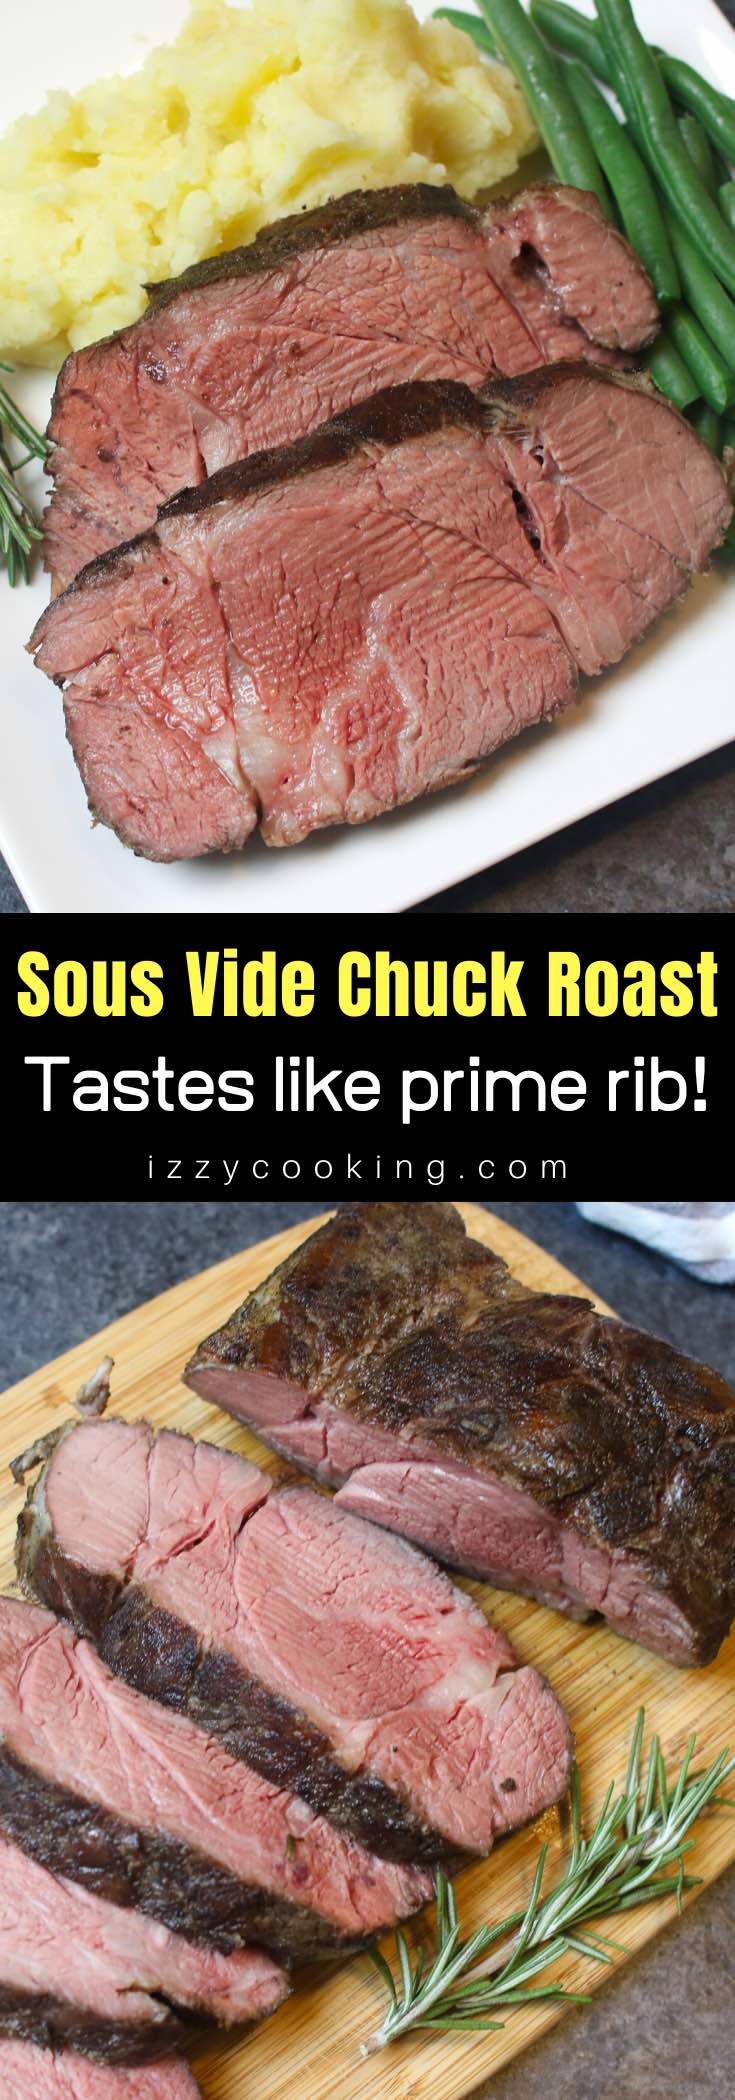 Sous Vide Chuck Roast is incredibly flavorful, tender and juicy, unlike the pot roast cooked the traditional way. Sous vide method transforms the cheap tough cut of a chuck roast into the most delicious beef roast that rivals the expensive prime rib. Oh my, it’s a game-changer! #SousVideChuckRoast #SousVidePotRoast #SousVideBeefRoast